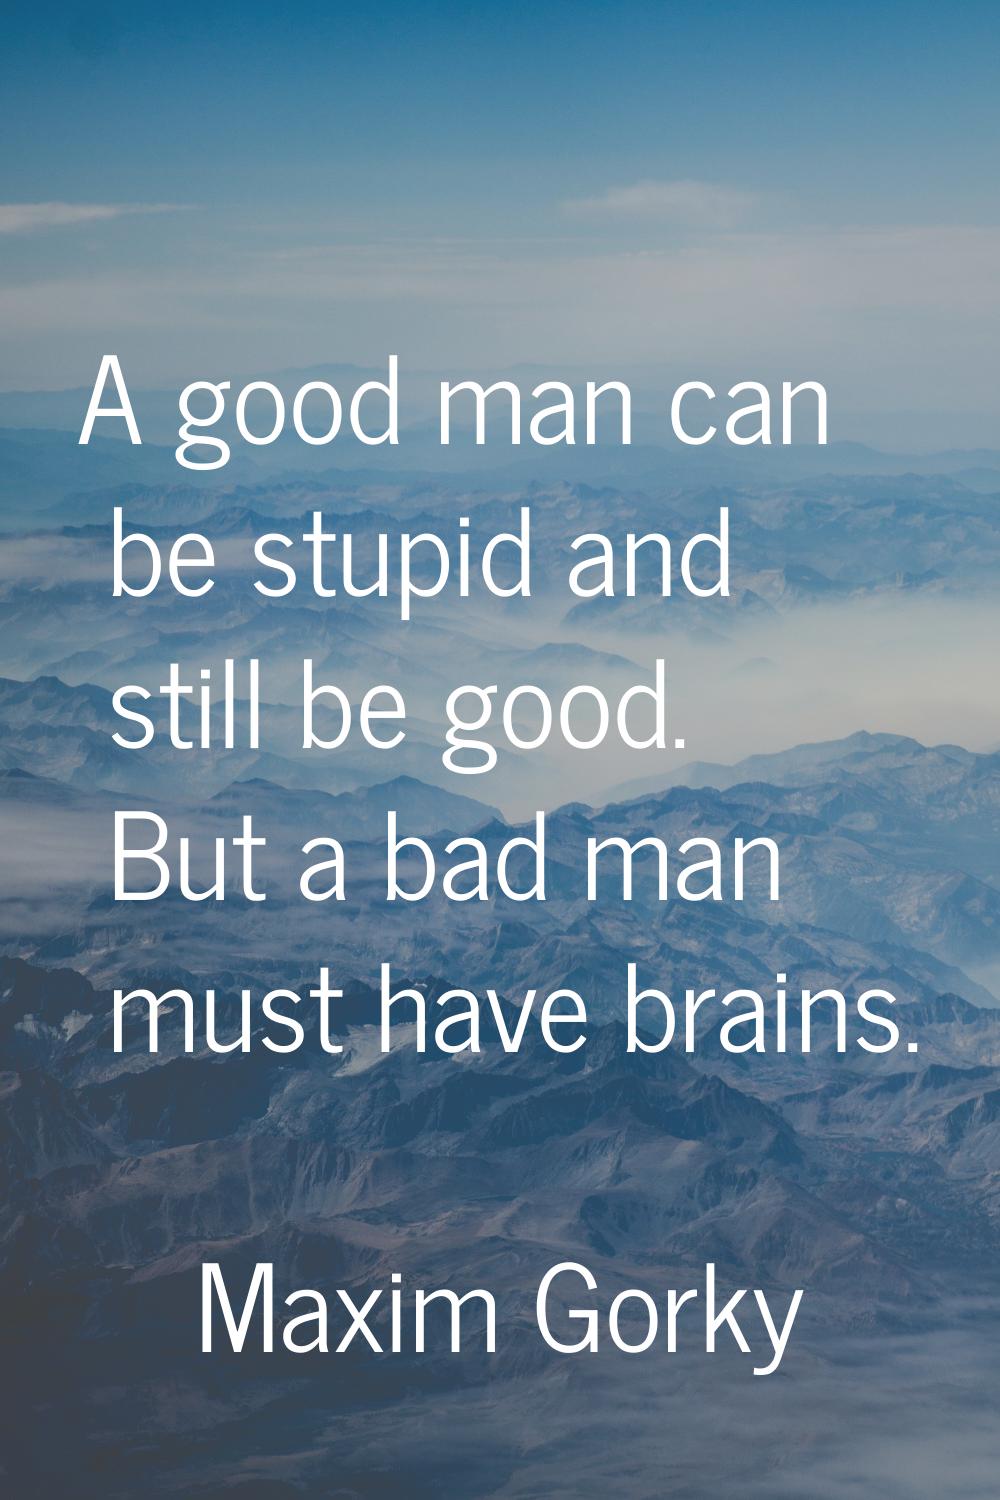 A good man can be stupid and still be good. But a bad man must have brains.